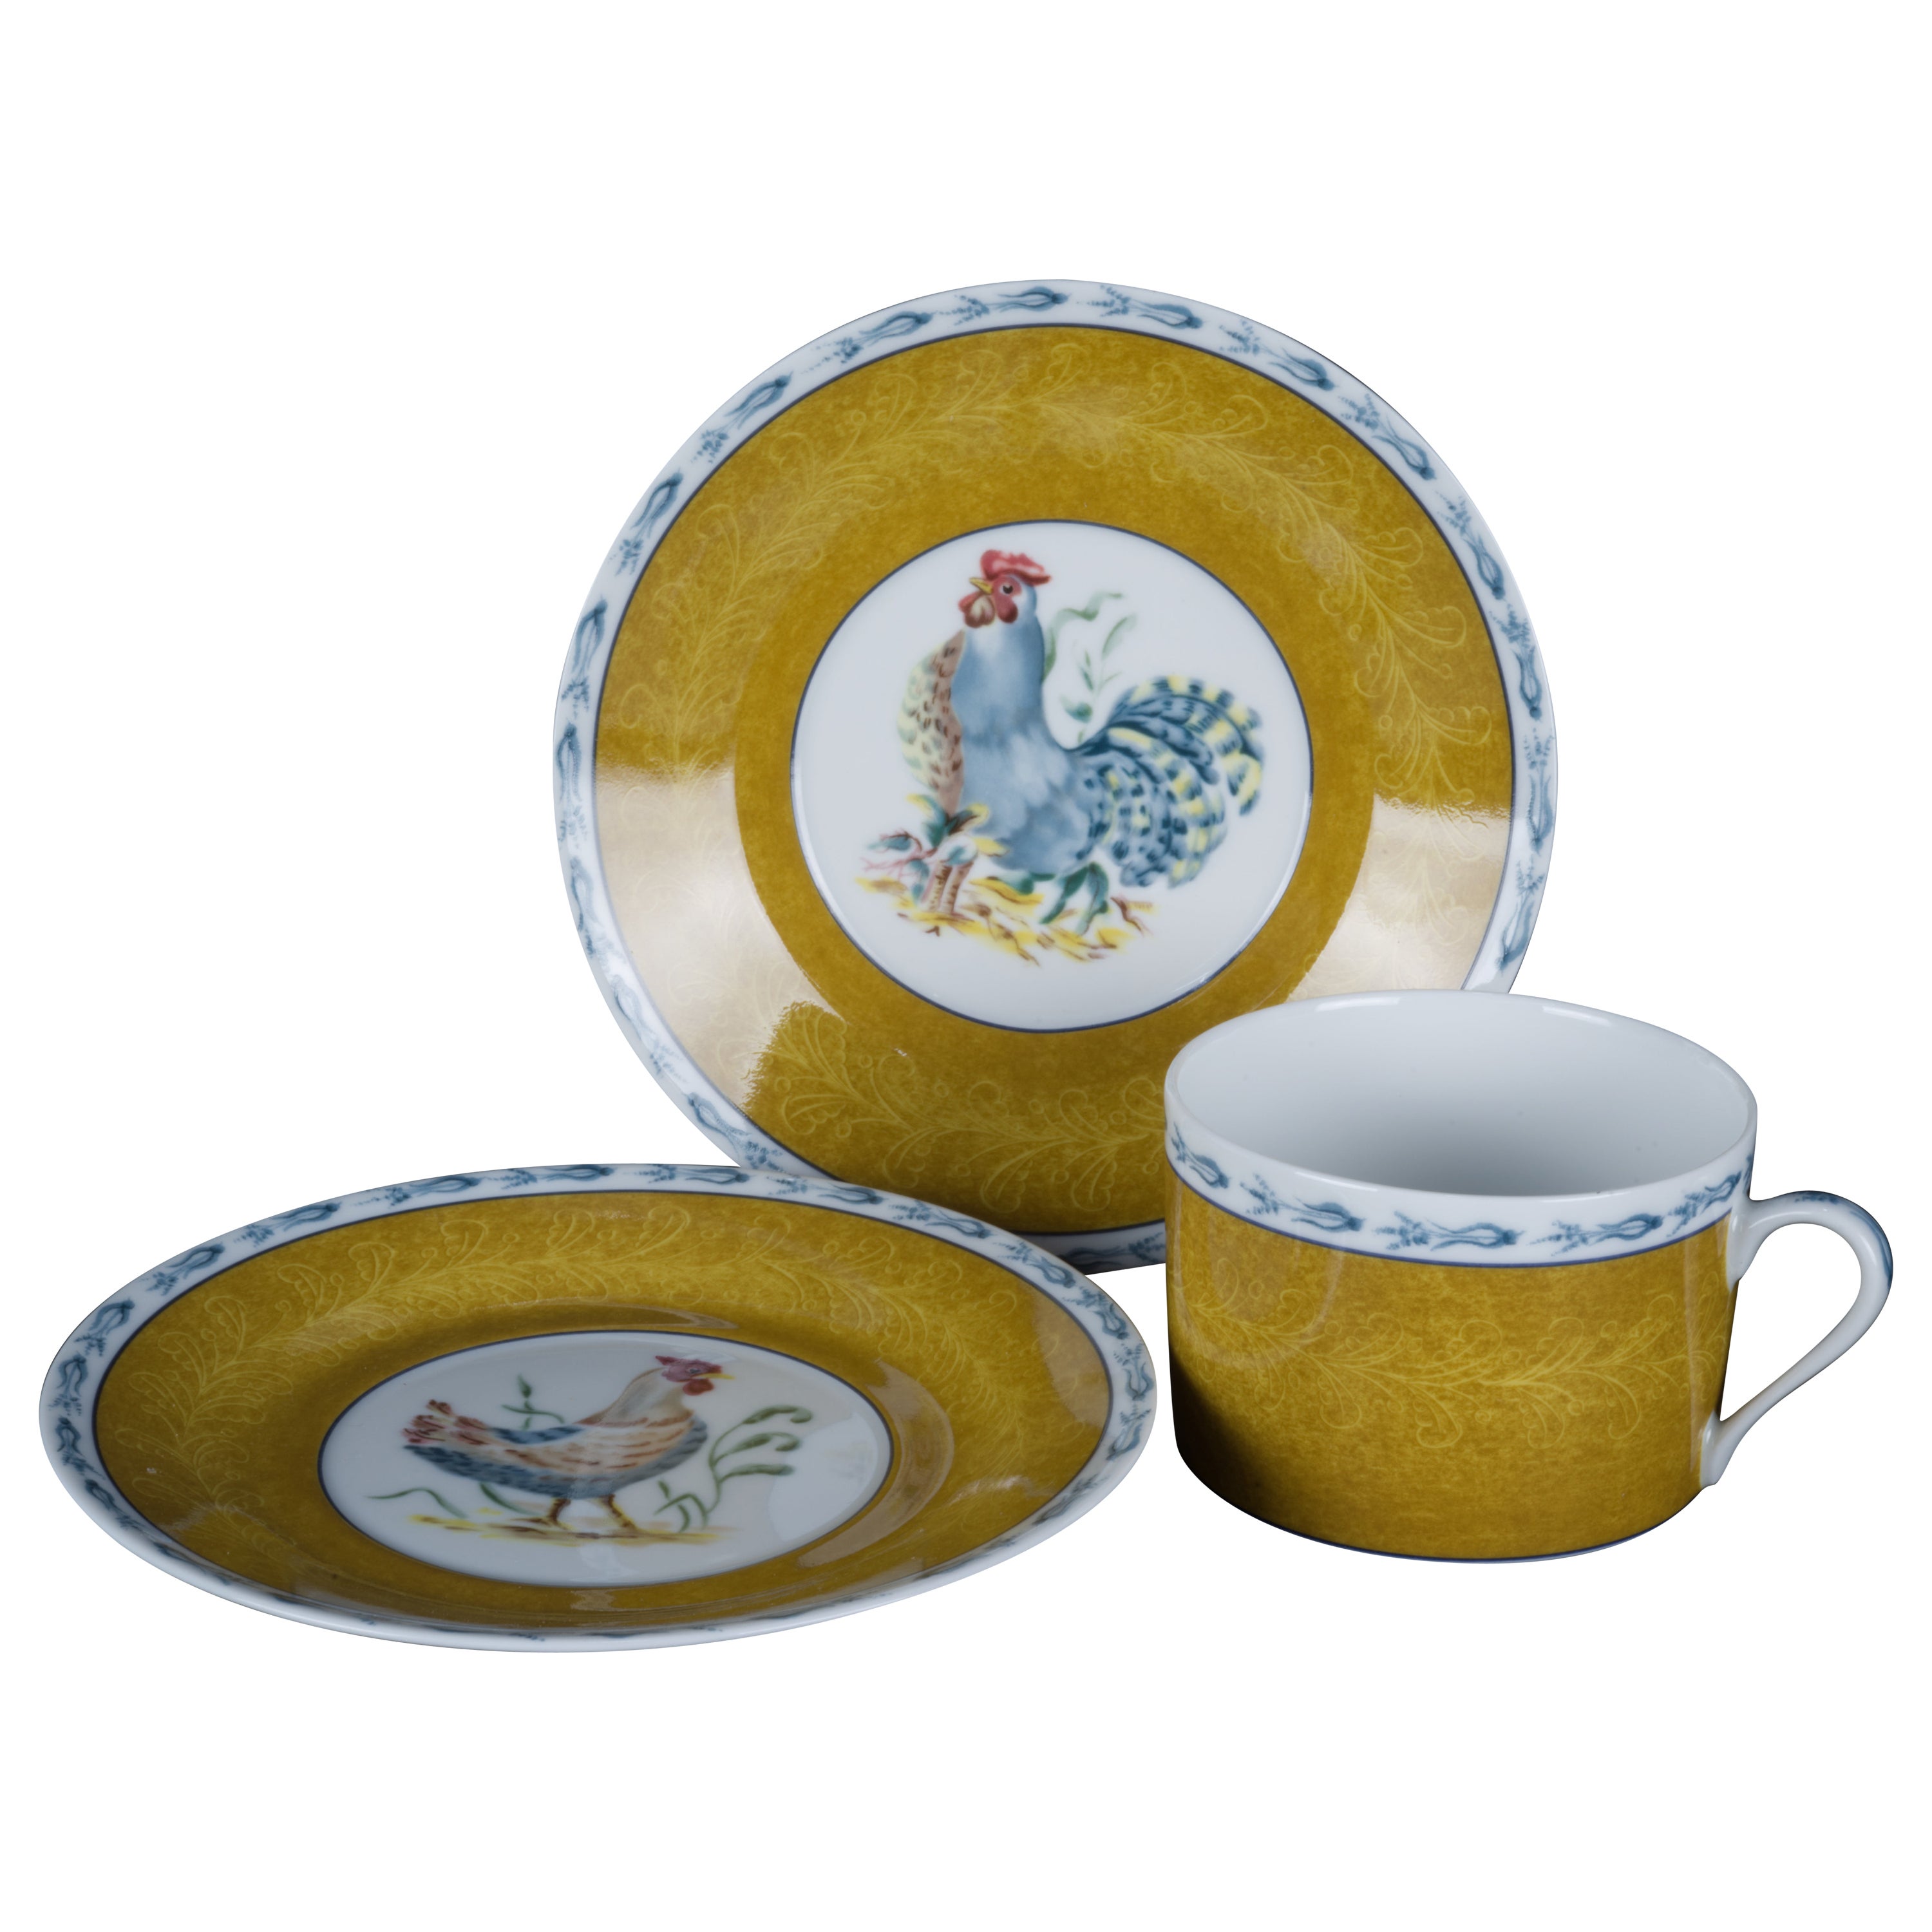 Basse Cour by Pierre Frey Set of Cup and 2 Saucers, Limoges Porcelain For Sale